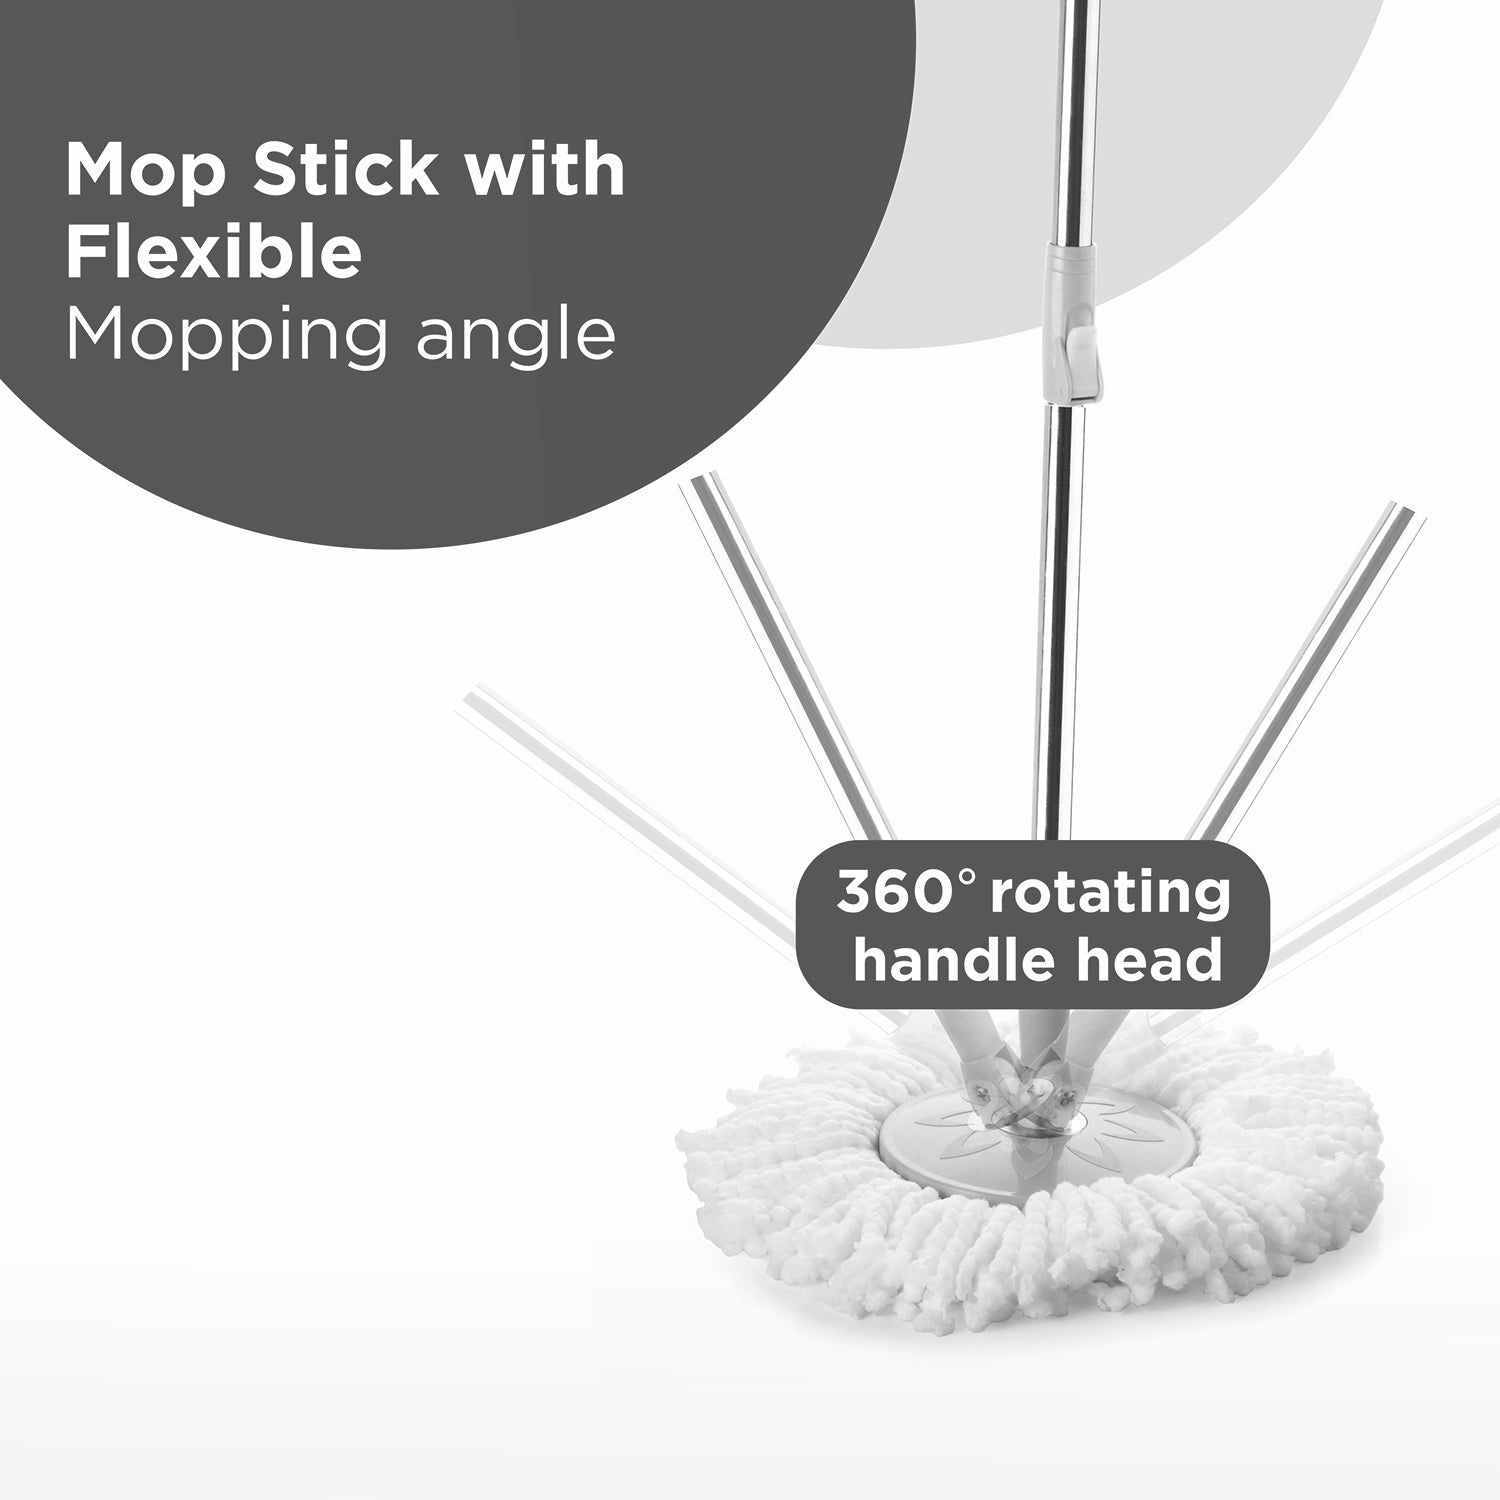 1185 Mop with Bucket For Floor Cleaning With Steel Spin /Mop for Floor Cleaning / Floor Cleaner Mop / Spin Mop / Magic Mop / Mop Stick / Spin Mop Set with Bucket DeoDap